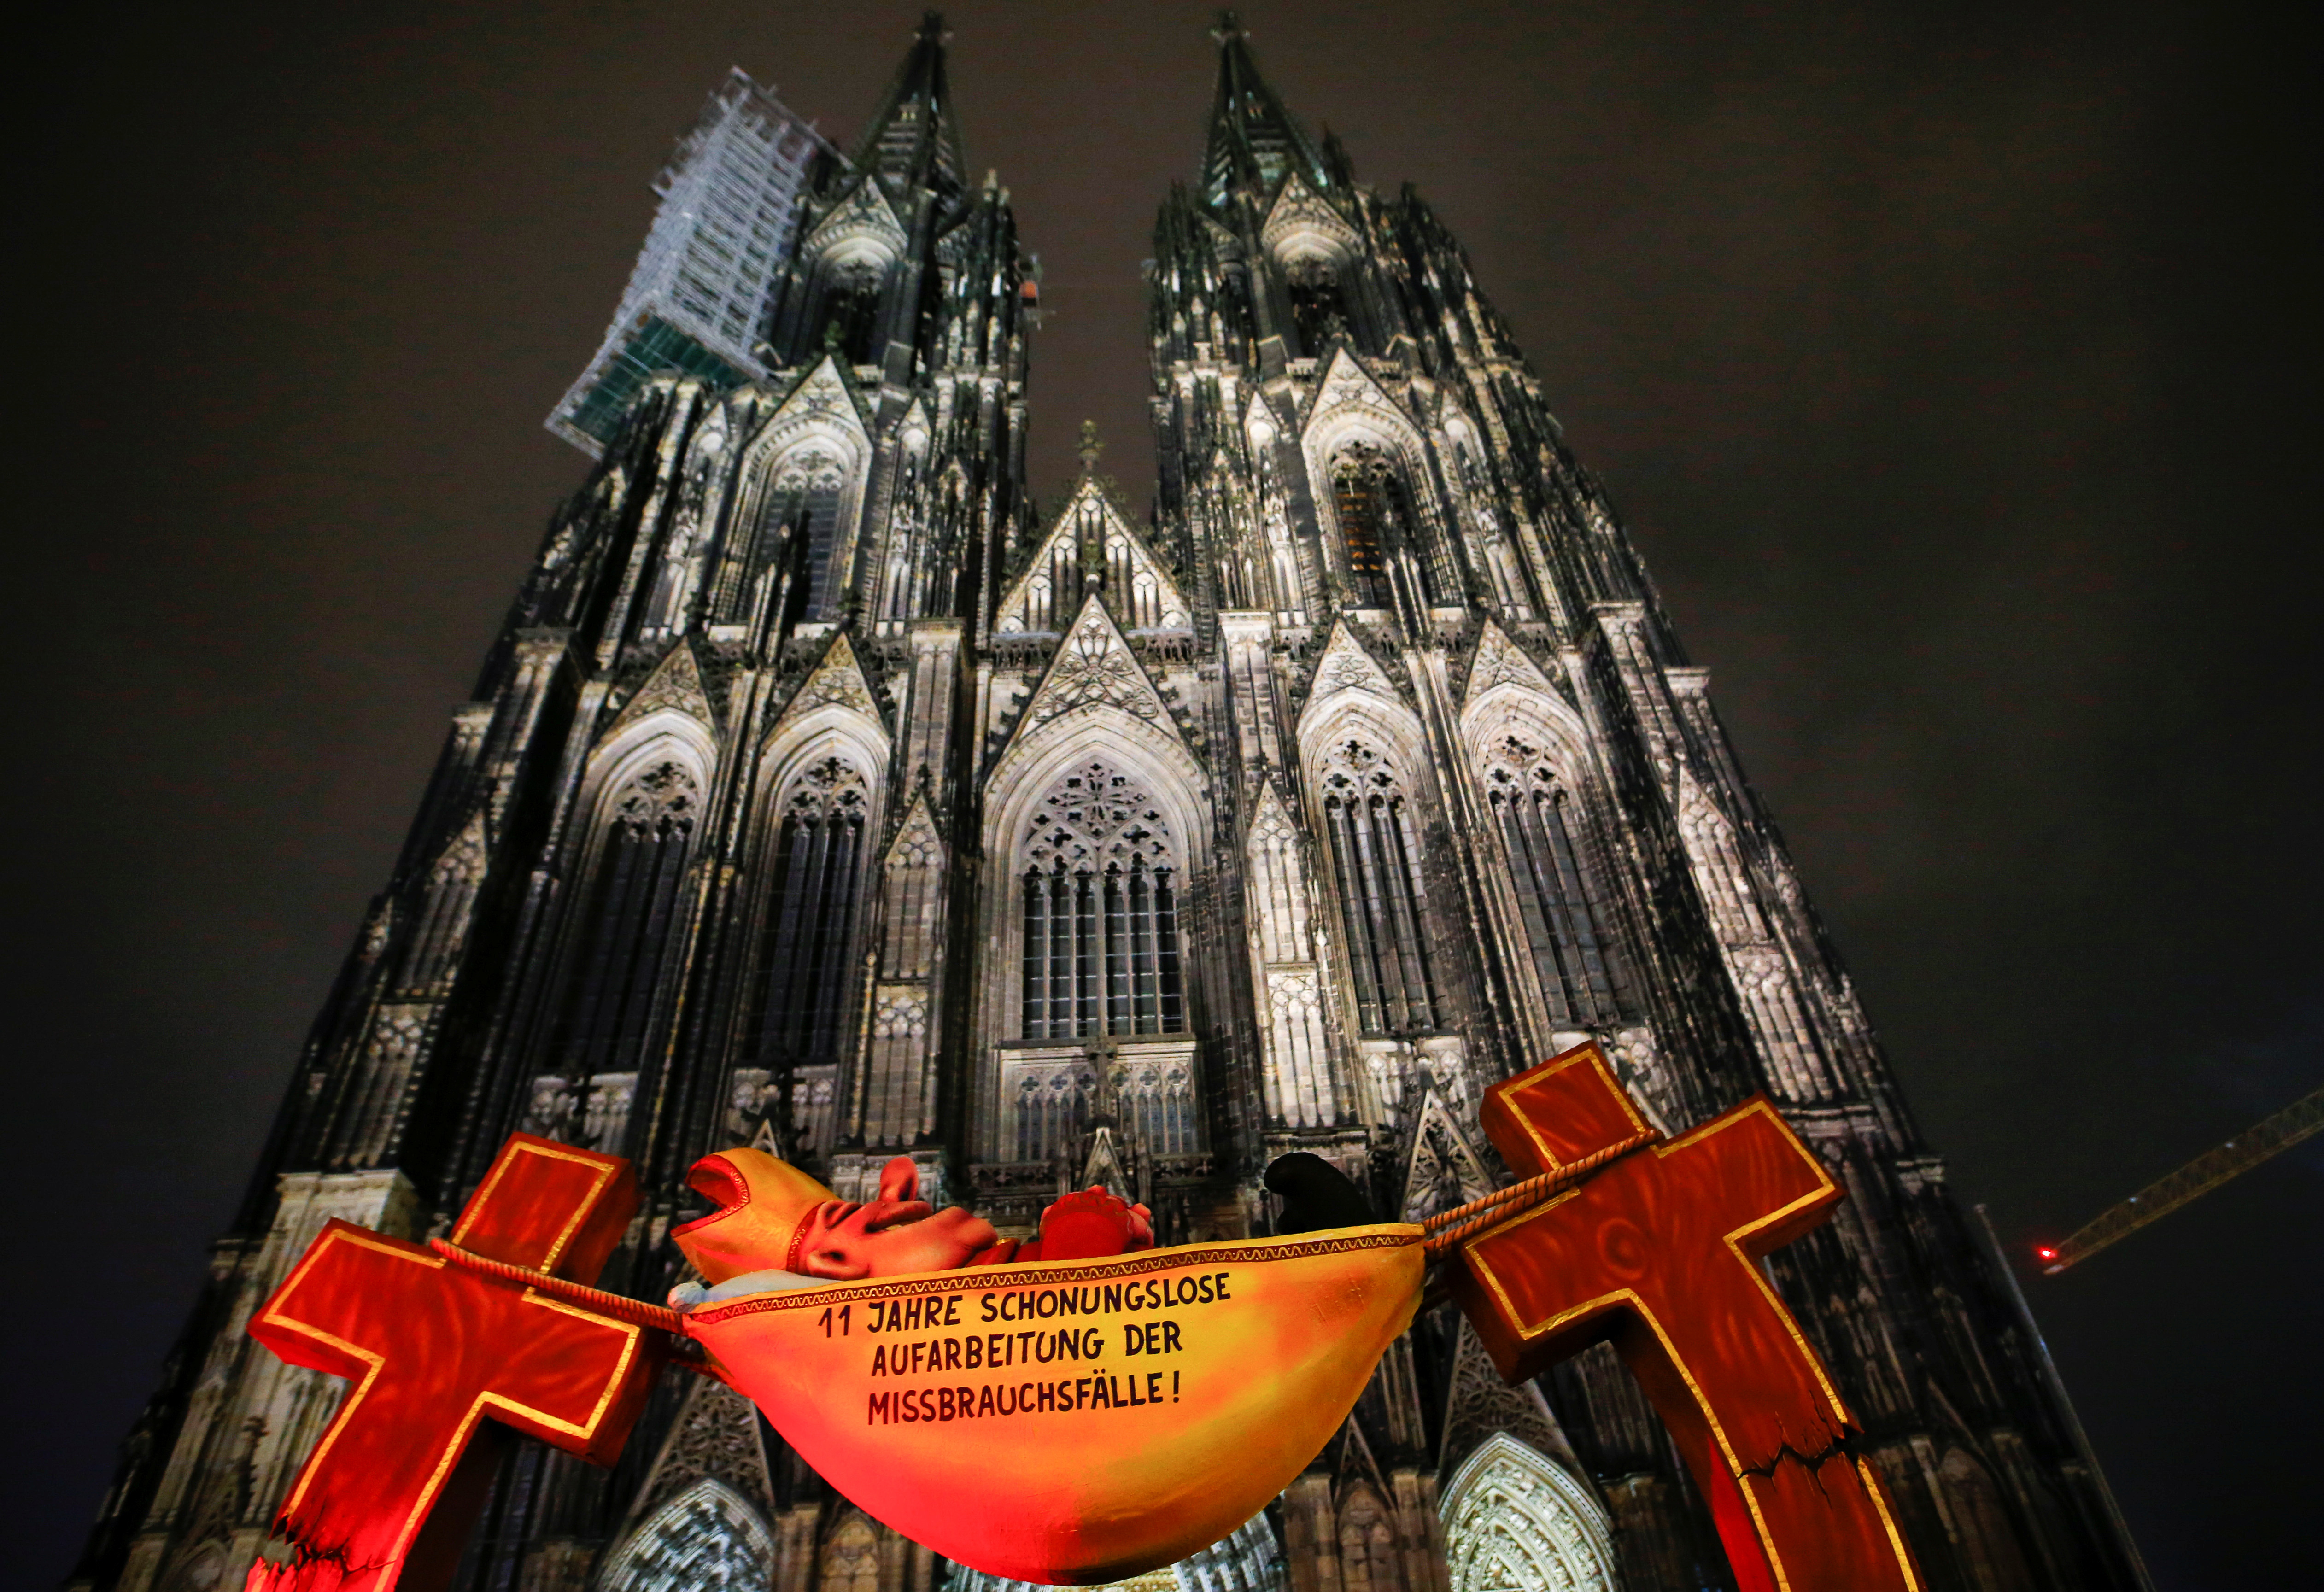 Protest against sexual abuse in front of Cologne Cathedral